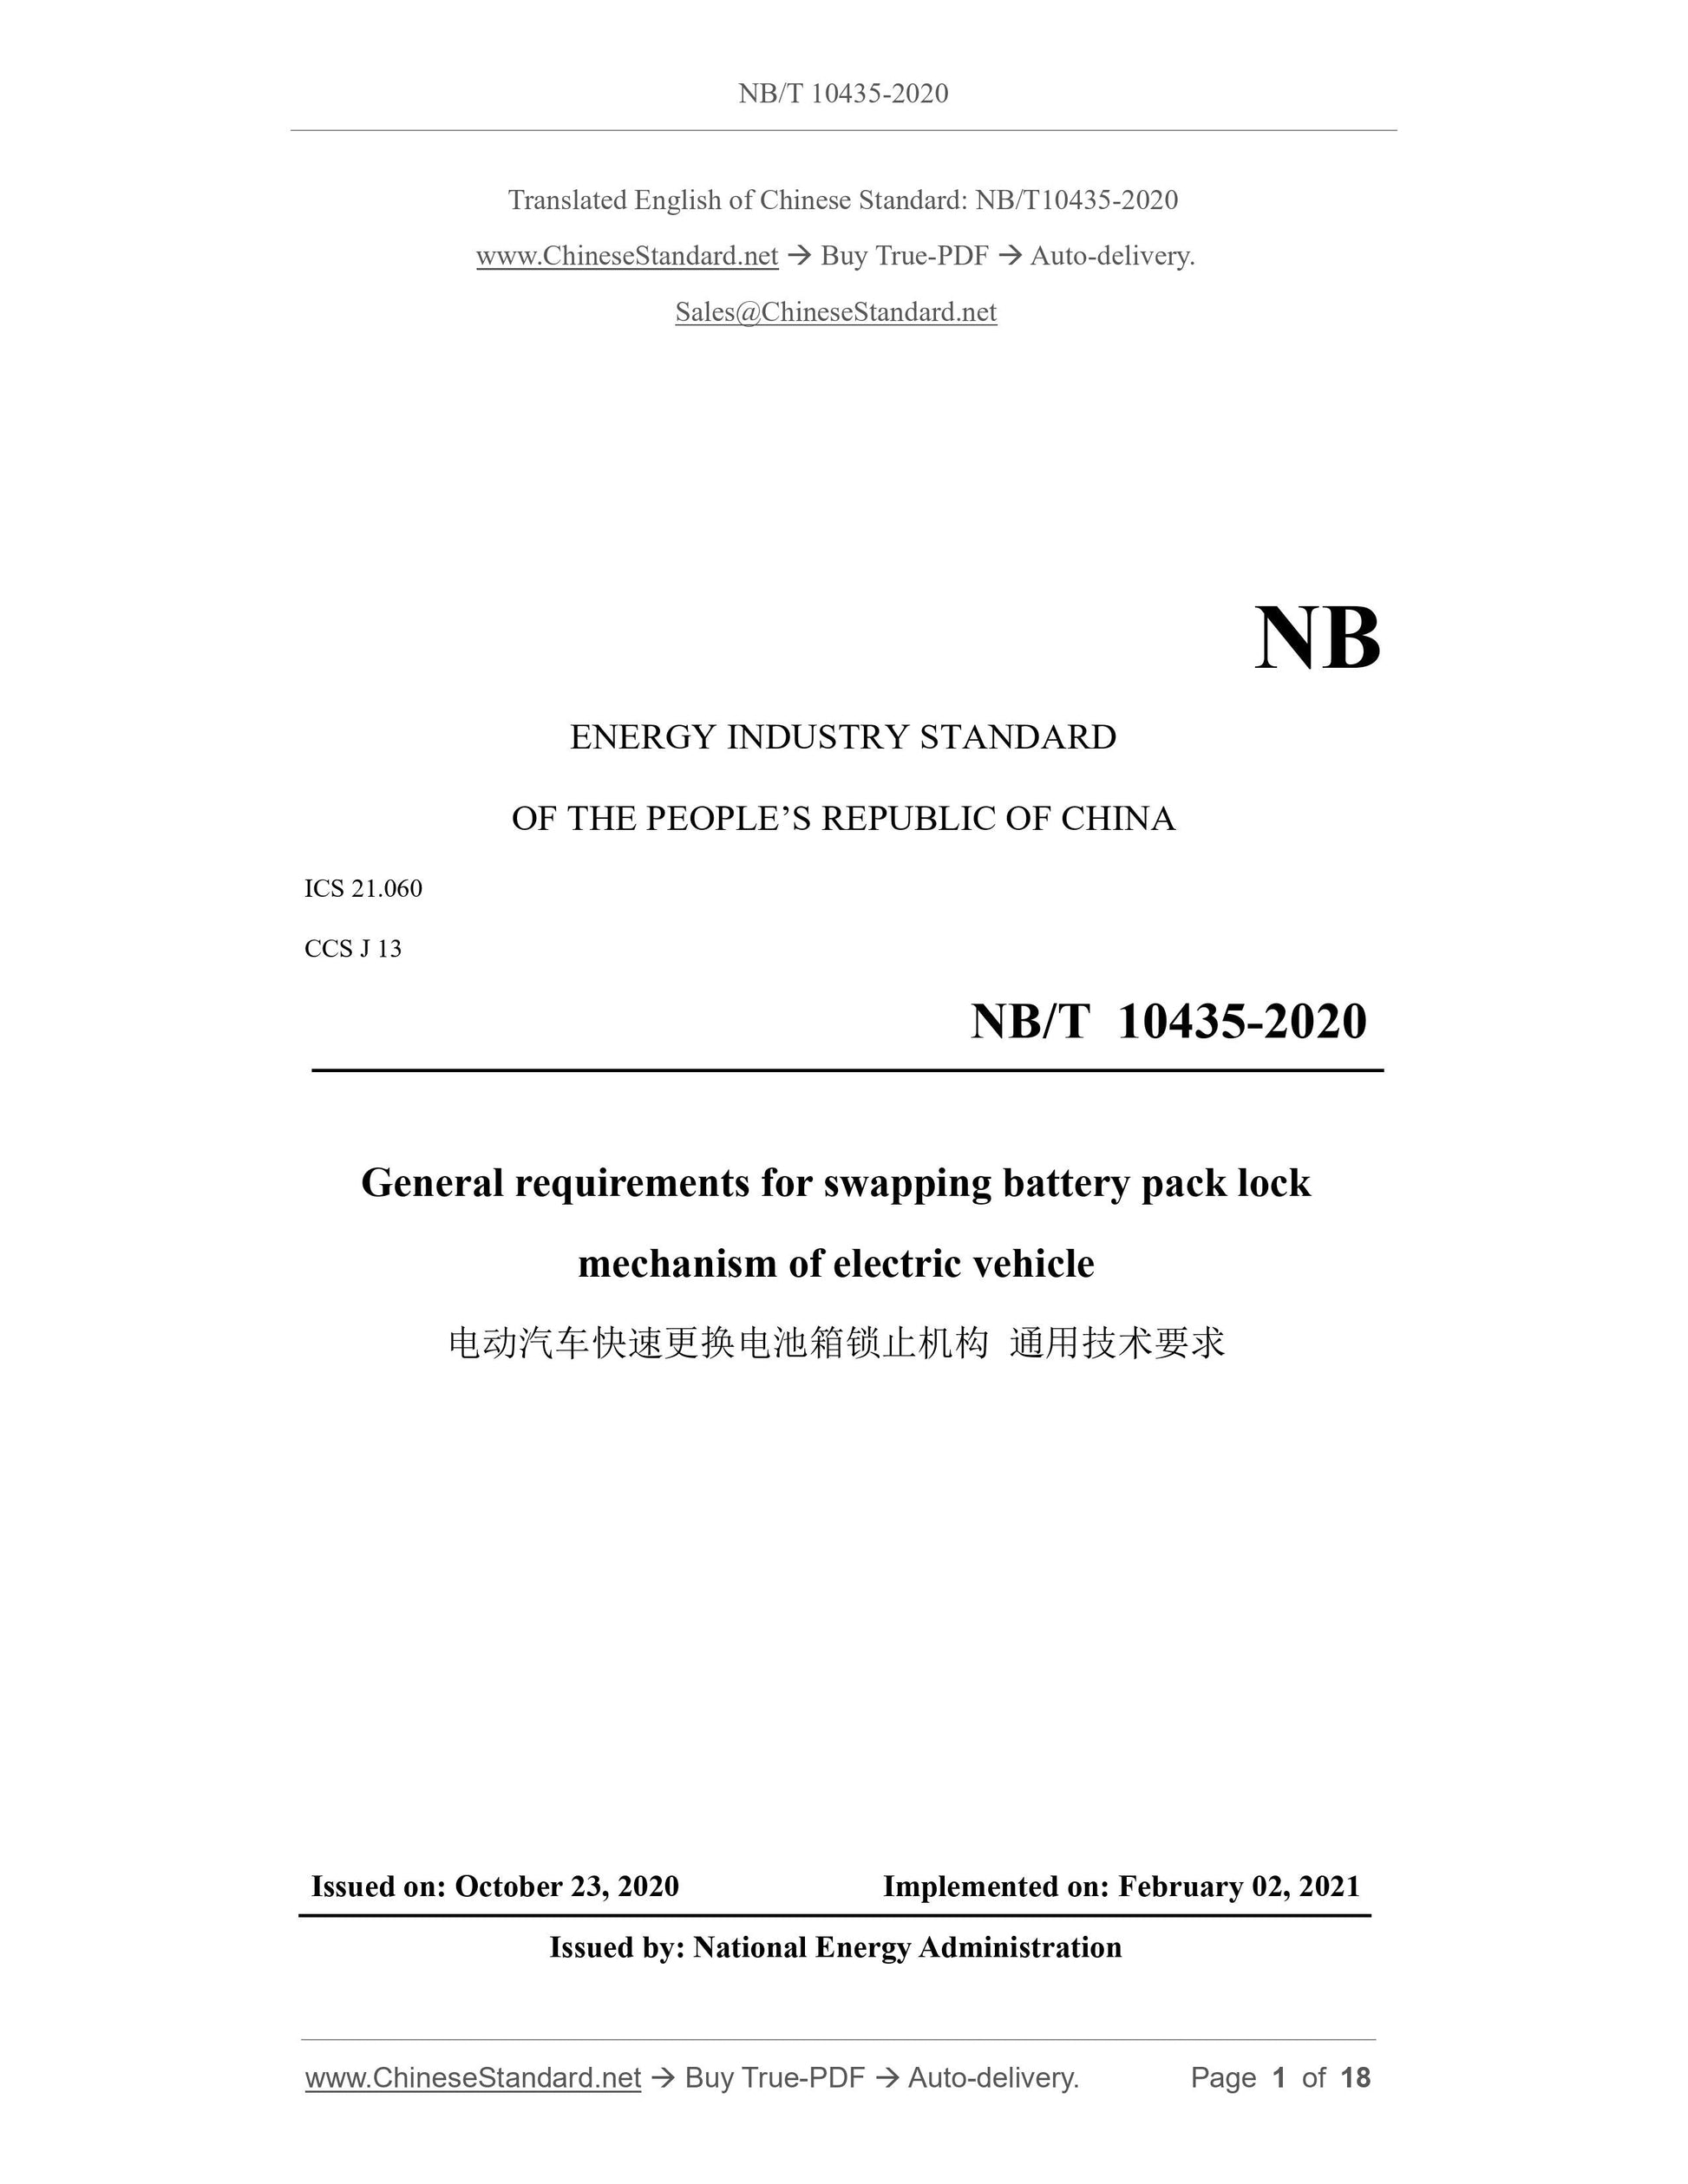 NB/T 10435-2020 Page 1